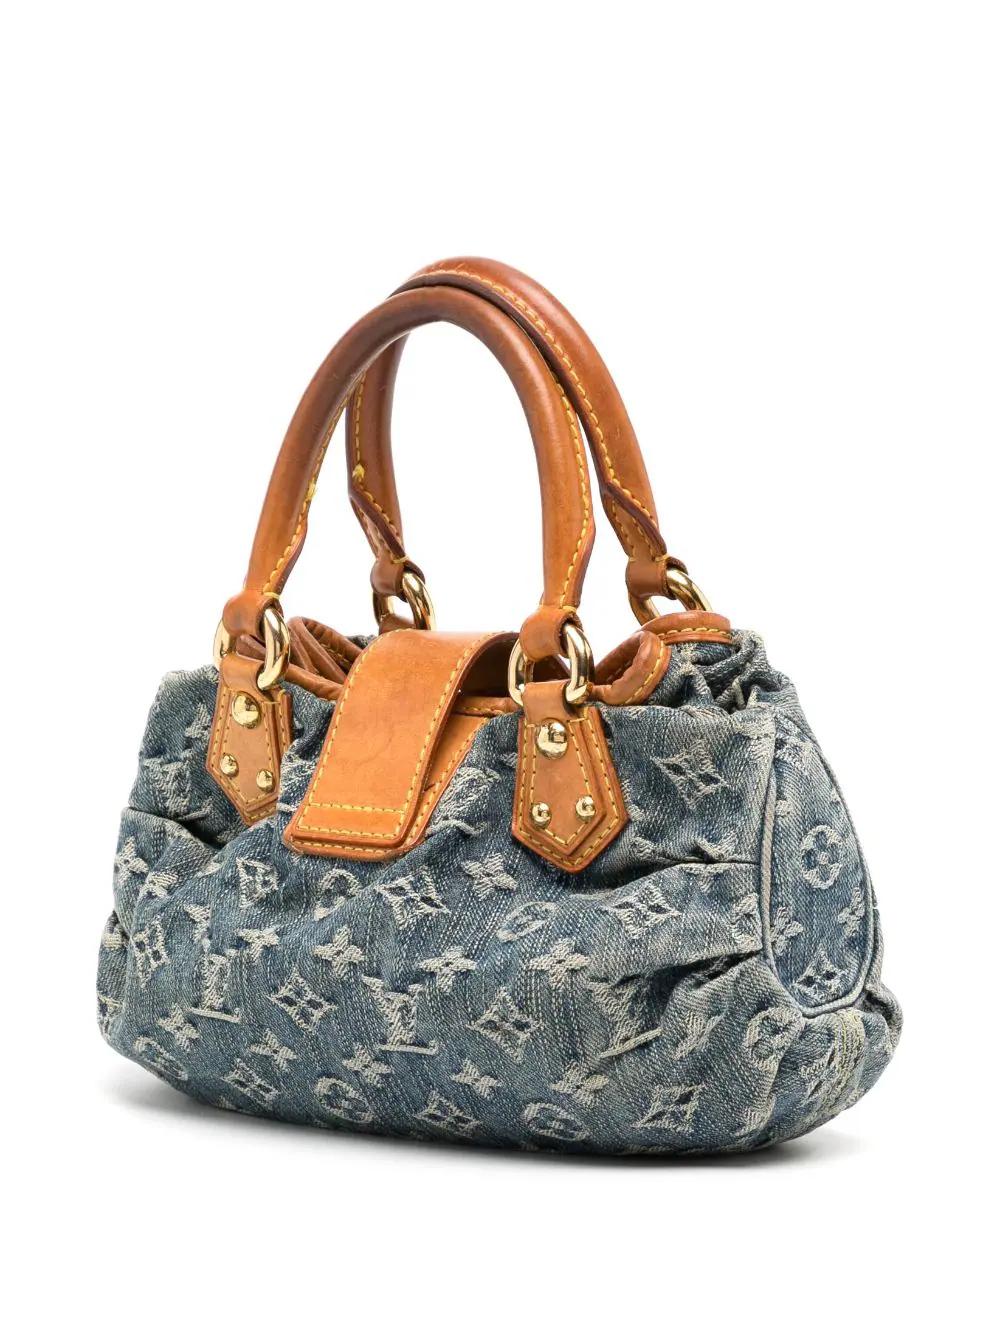 This Louis Vuitton Mini Pleaty bag is the perfect size for a day-to-night spring/summer outfit. Expertly crafted in France from the Louis Vuitton monogram in denim jacquard. This trendy piece features round top leather handles, strap closure and